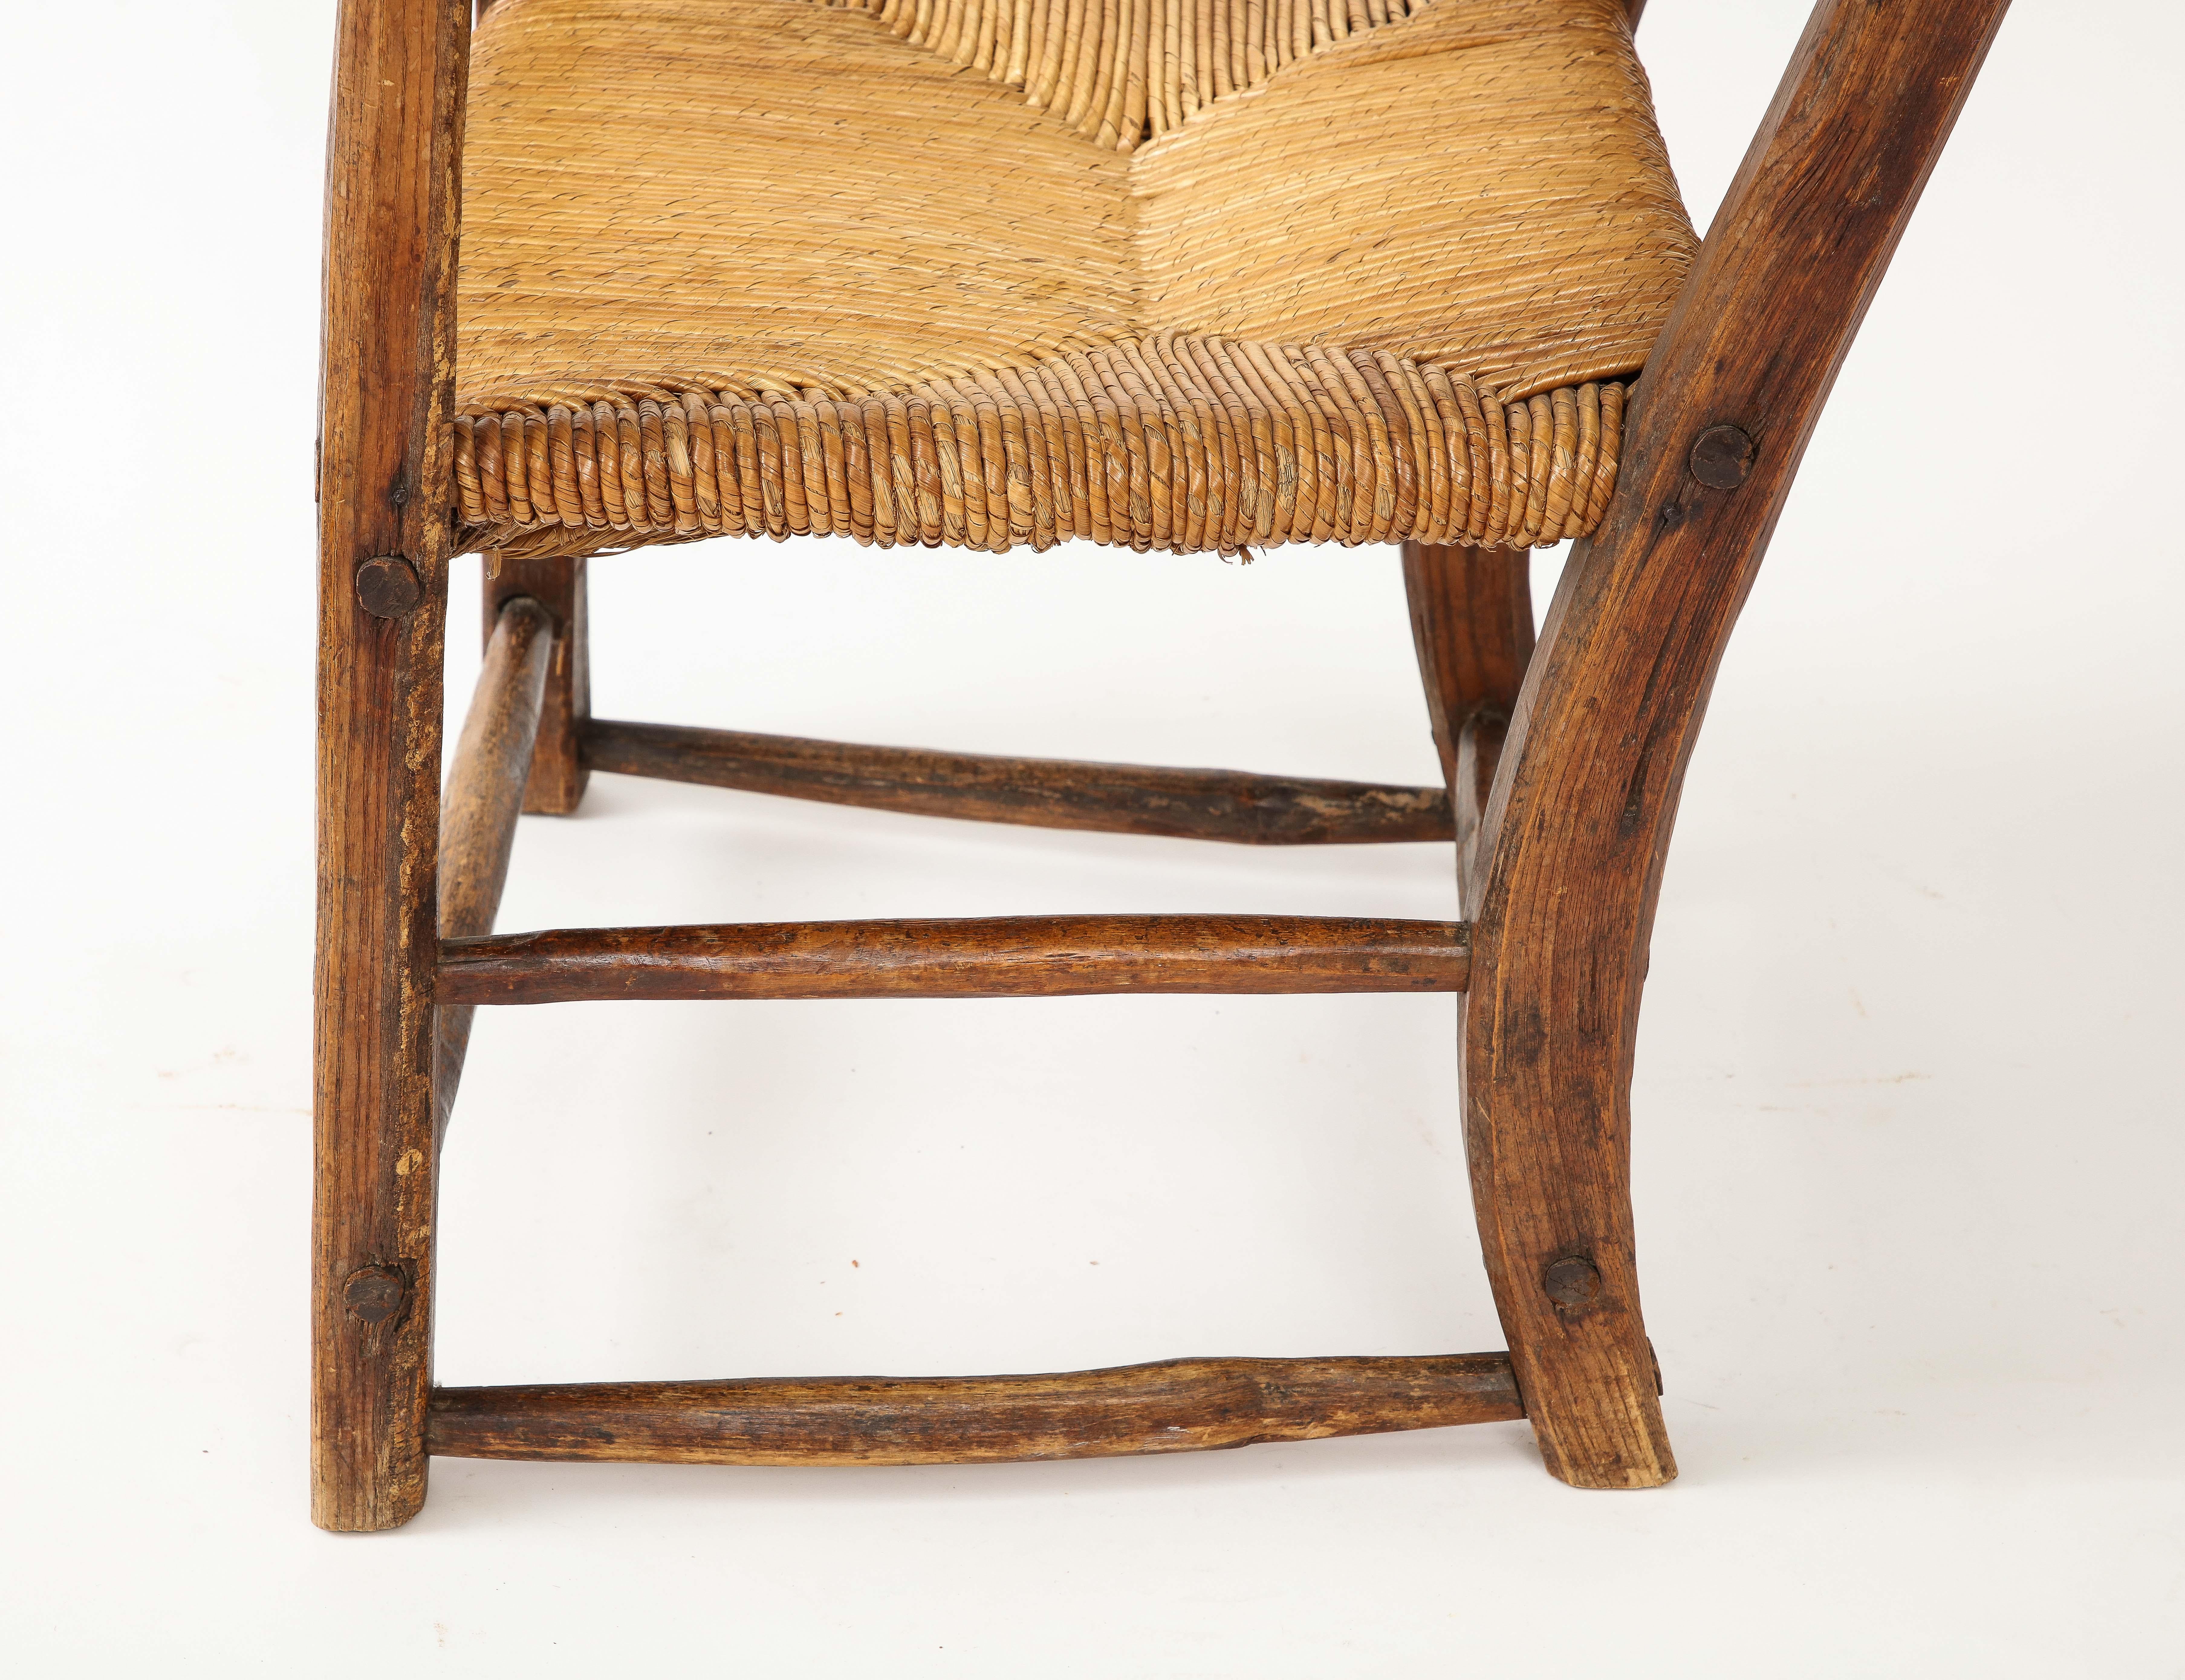 19th Century Rustic French Chair with Straw Seat For Sale 6